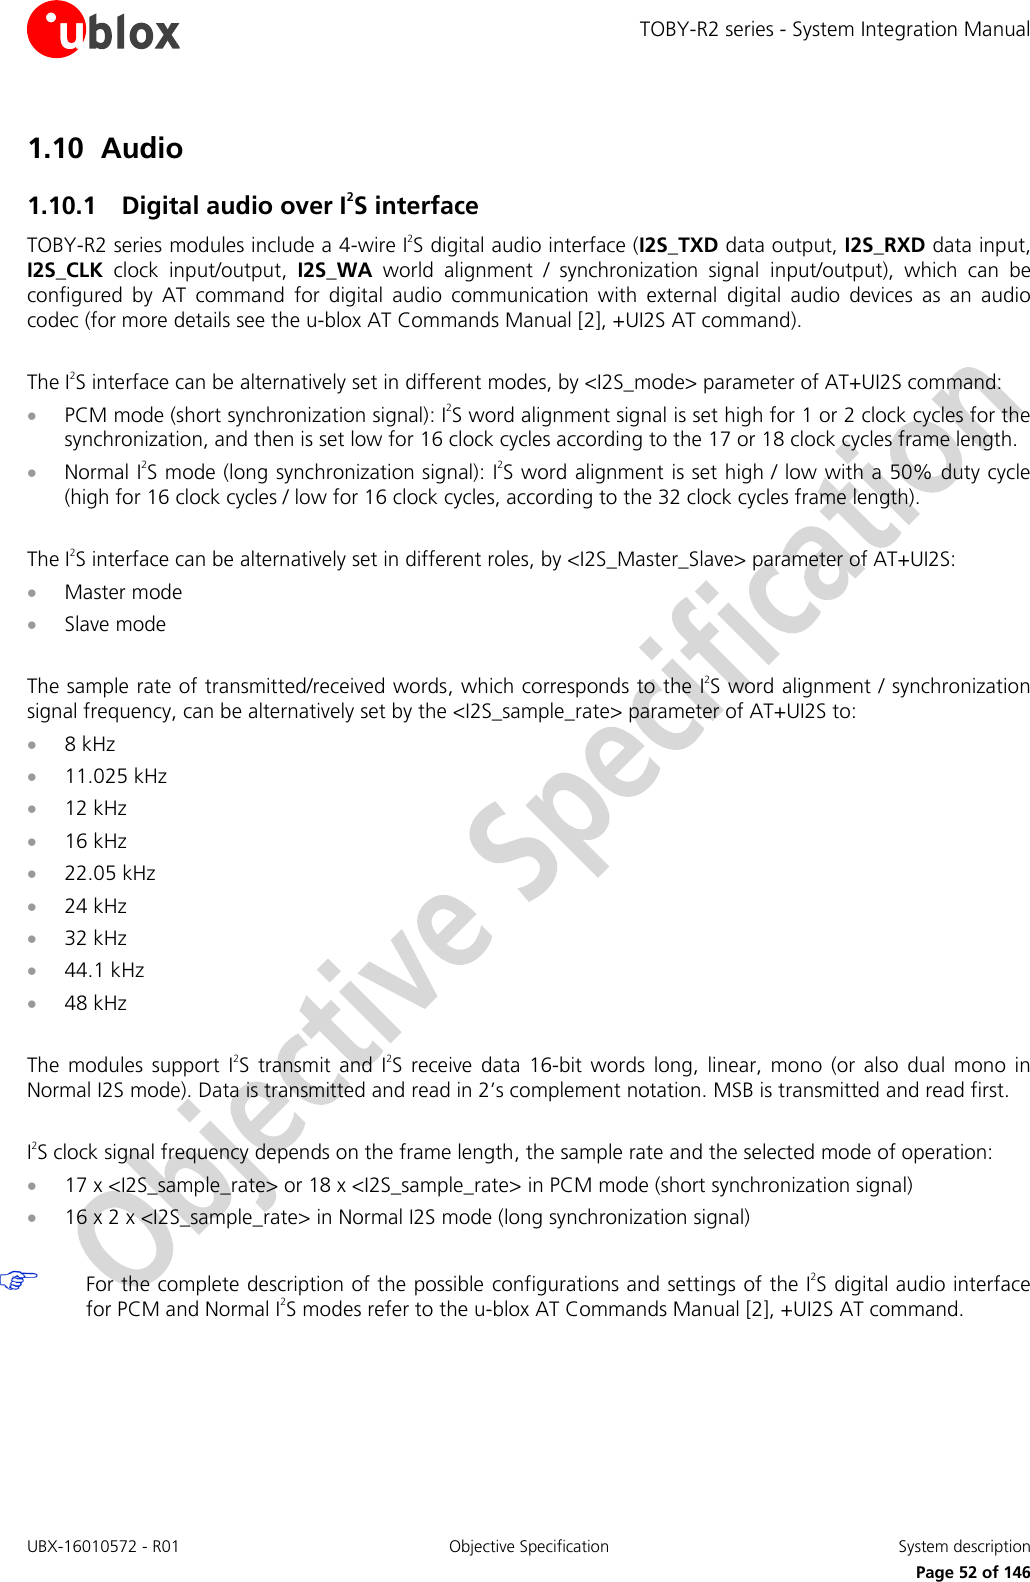 TOBY-R2 series - System Integration Manual UBX-16010572 - R01  Objective Specification  System description     Page 52 of 146 1.10 Audio 1.10.1 Digital audio over I2S interface TOBY-R2 series modules include a 4-wire I2S digital audio interface (I2S_TXD data output, I2S_RXD data input, I2S_CLK  clock  input/output,  I2S_WA  world  alignment  /  synchronization  signal  input/output),  which  can  be configured  by  AT  command  for  digital  audio  communication  with  external  digital  audio  devices  as  an  audio codec (for more details see the u-blox AT Commands Manual [2], +UI2S AT command).  The I2S interface can be alternatively set in different modes, by &lt;I2S_mode&gt; parameter of AT+UI2S command:  PCM mode (short synchronization signal): I2S word alignment signal is set high for 1 or 2 clock cycles for the synchronization, and then is set low for 16 clock cycles according to the 17 or 18 clock cycles frame length.  Normal I2S mode (long synchronization signal): I2S word alignment is set high / low with a 50% duty cycle (high for 16 clock cycles / low for 16 clock cycles, according to the 32 clock cycles frame length).  The I2S interface can be alternatively set in different roles, by &lt;I2S_Master_Slave&gt; parameter of AT+UI2S:  Master mode  Slave mode  The sample rate of transmitted/received words, which corresponds to the I2S word alignment / synchronization signal frequency, can be alternatively set by the &lt;I2S_sample_rate&gt; parameter of AT+UI2S to:  8 kHz  11.025 kHz  12 kHz  16 kHz  22.05 kHz  24 kHz  32 kHz  44.1 kHz  48 kHz  The  modules  support  I2S  transmit  and  I2S  receive  data  16-bit  words  long,  linear,  mono  (or also  dual  mono  in Normal I2S mode). Data is transmitted and read in 2’s complement notation. MSB is transmitted and read first.  I2S clock signal frequency depends on the frame length, the sample rate and the selected mode of operation:  17 x &lt;I2S_sample_rate&gt; or 18 x &lt;I2S_sample_rate&gt; in PCM mode (short synchronization signal)  16 x 2 x &lt;I2S_sample_rate&gt; in Normal I2S mode (long synchronization signal)   For the complete description of the possible configurations and settings of the I2S digital audio interface for PCM and Normal I2S modes refer to the u-blox AT Commands Manual [2], +UI2S AT command.  